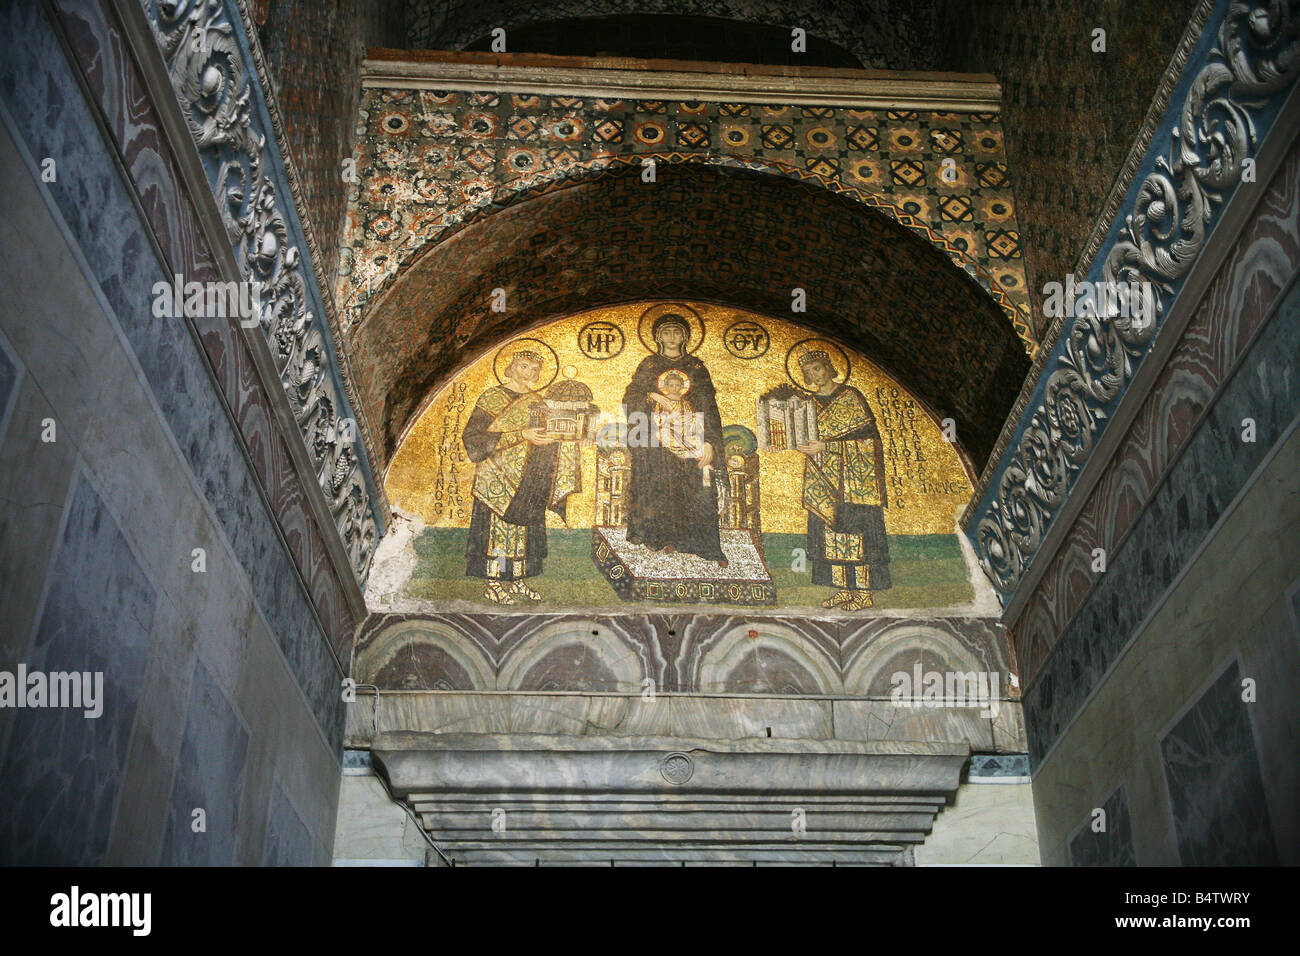 Mosaic of The Virgin and Child flanked by Justinian I and Constantine I, in Hagia Sophia, Istanbul. Stock Photo